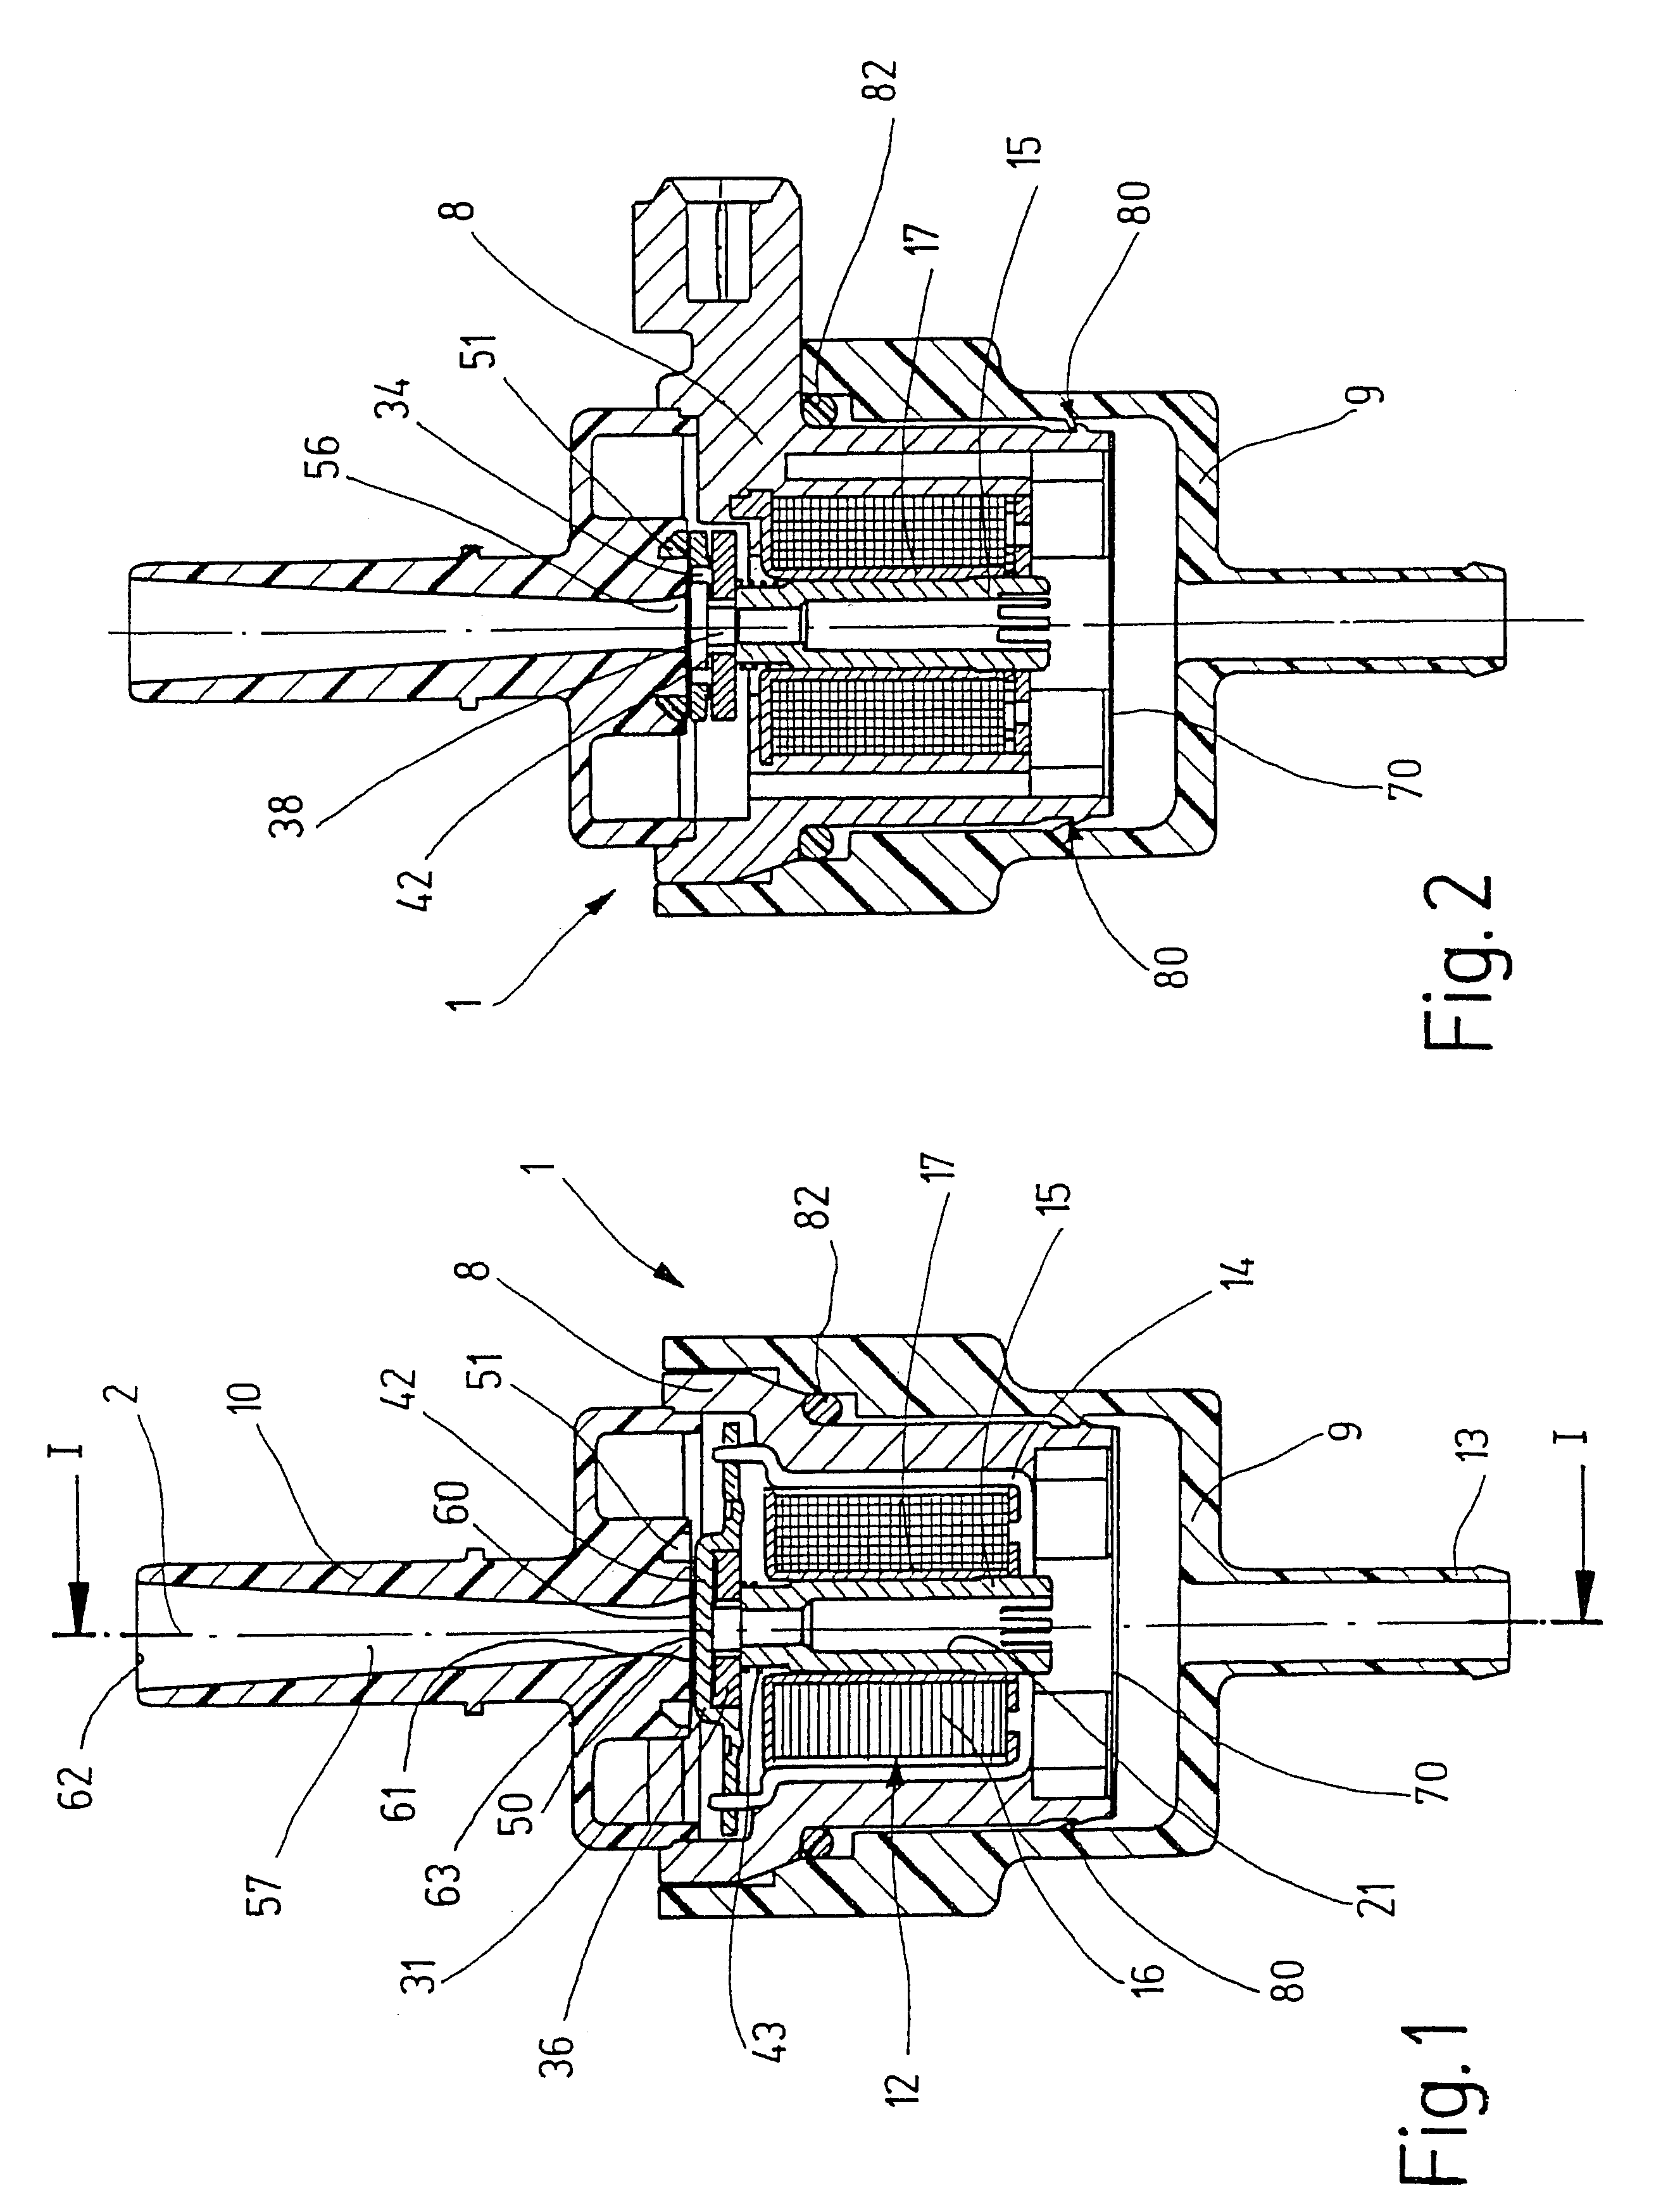 Valve for metered introduction of volatilized fuel